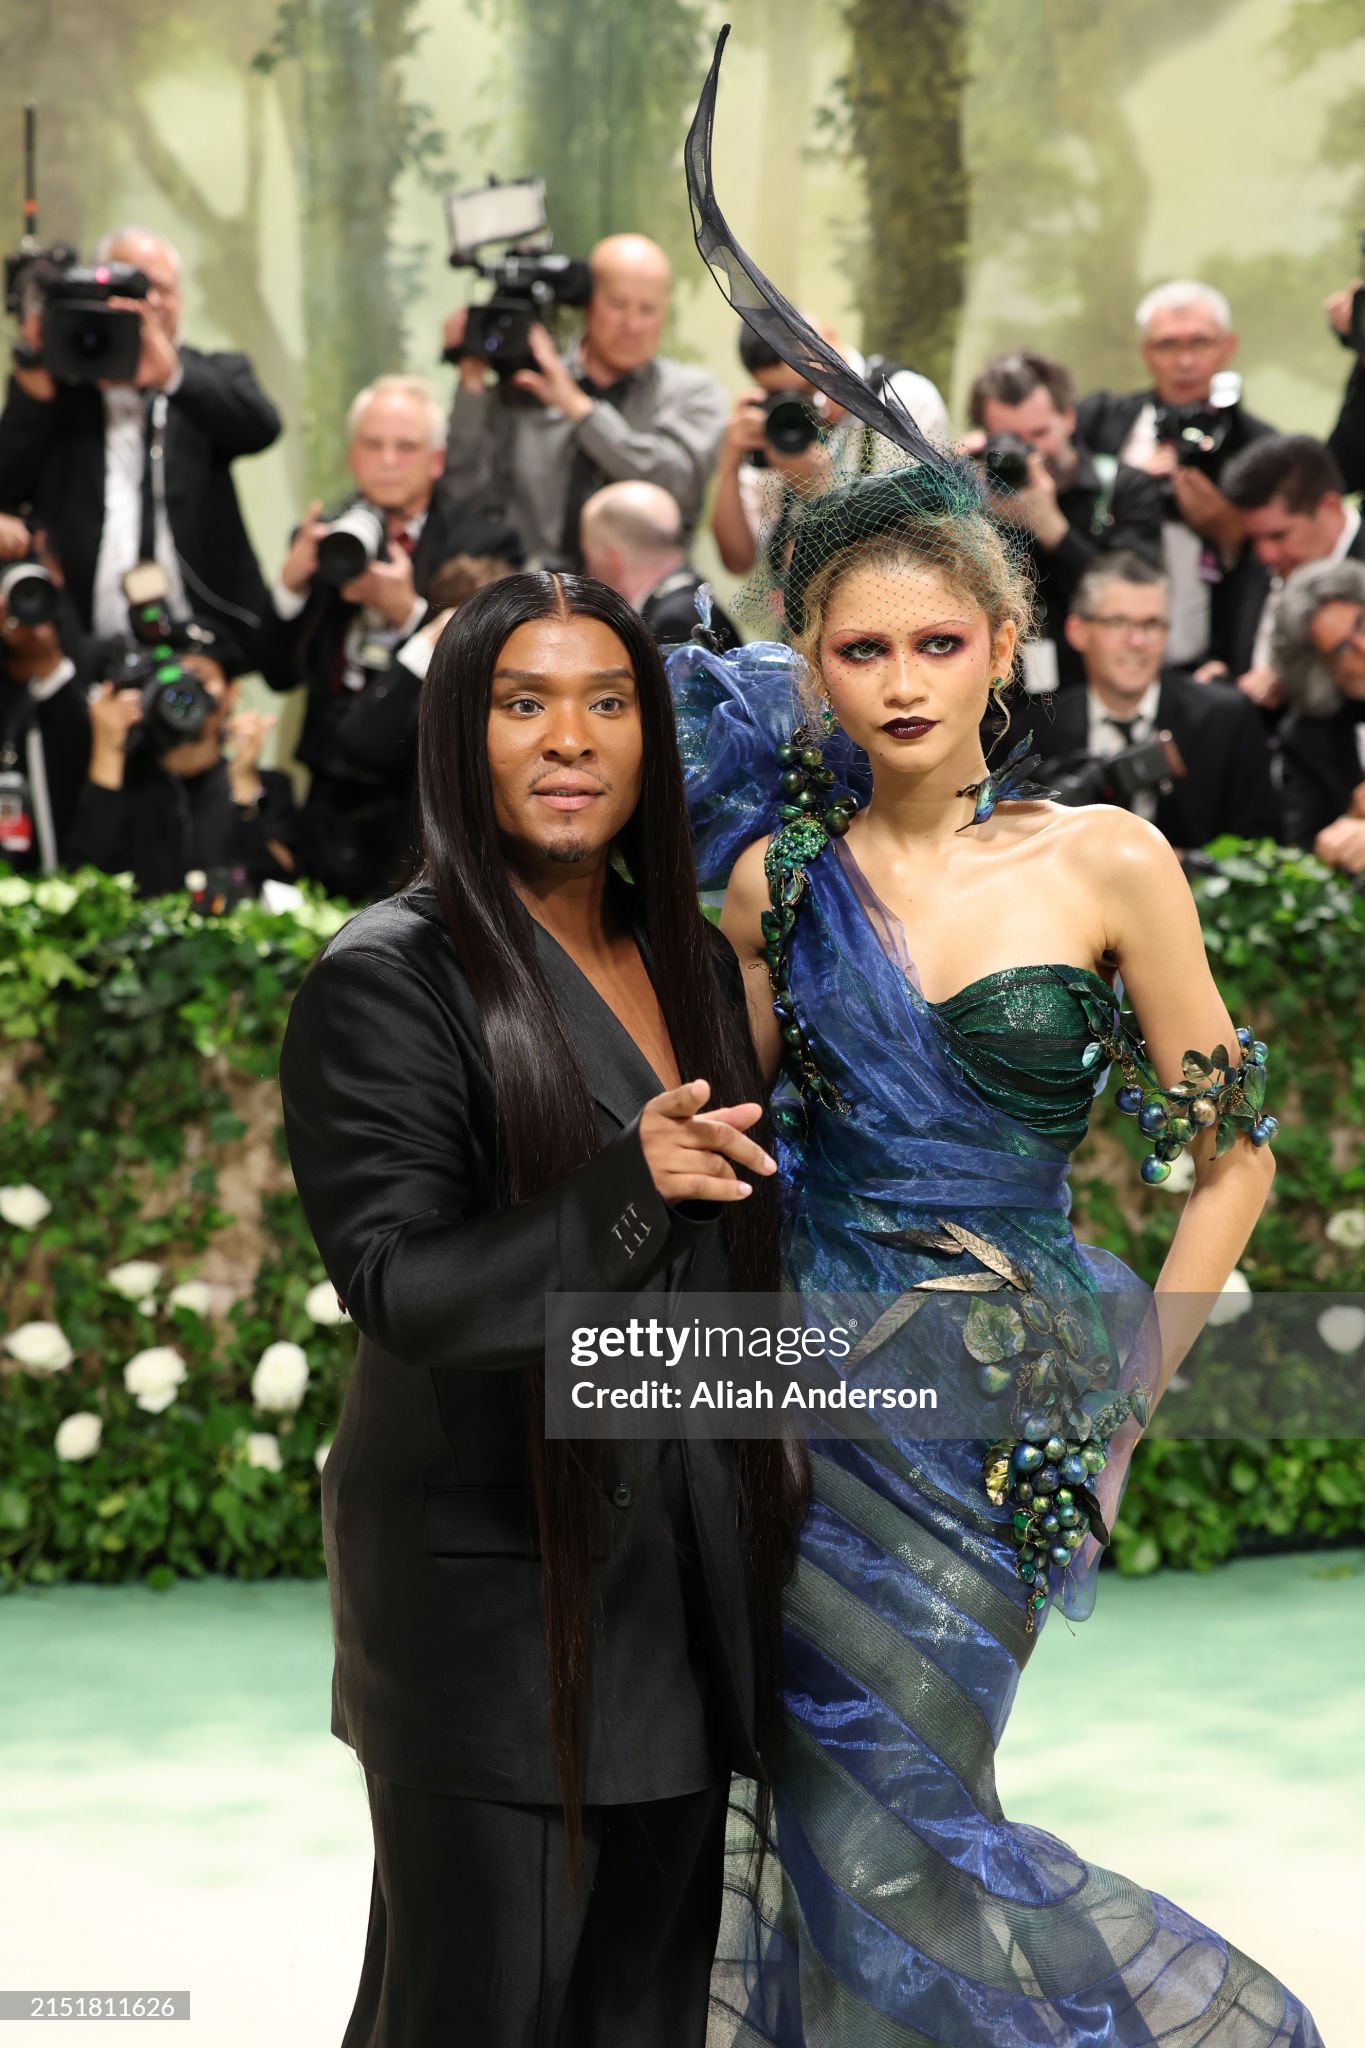 gettyimages-2151811626-2048x2048.jpg